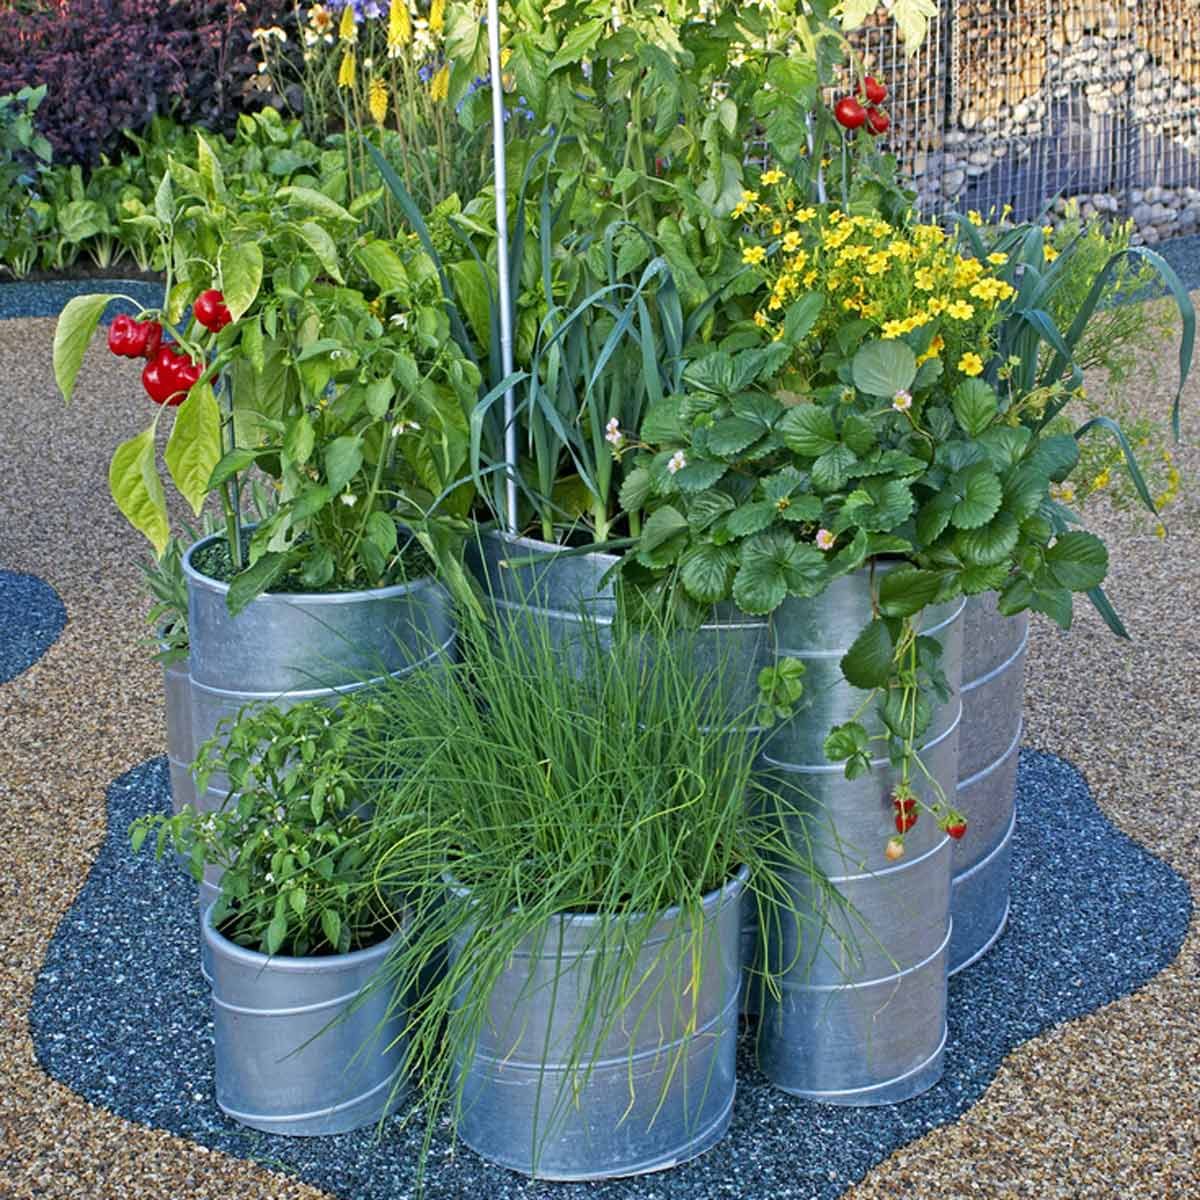 Plants You Can Grow In Containers - www.inf-inet.com